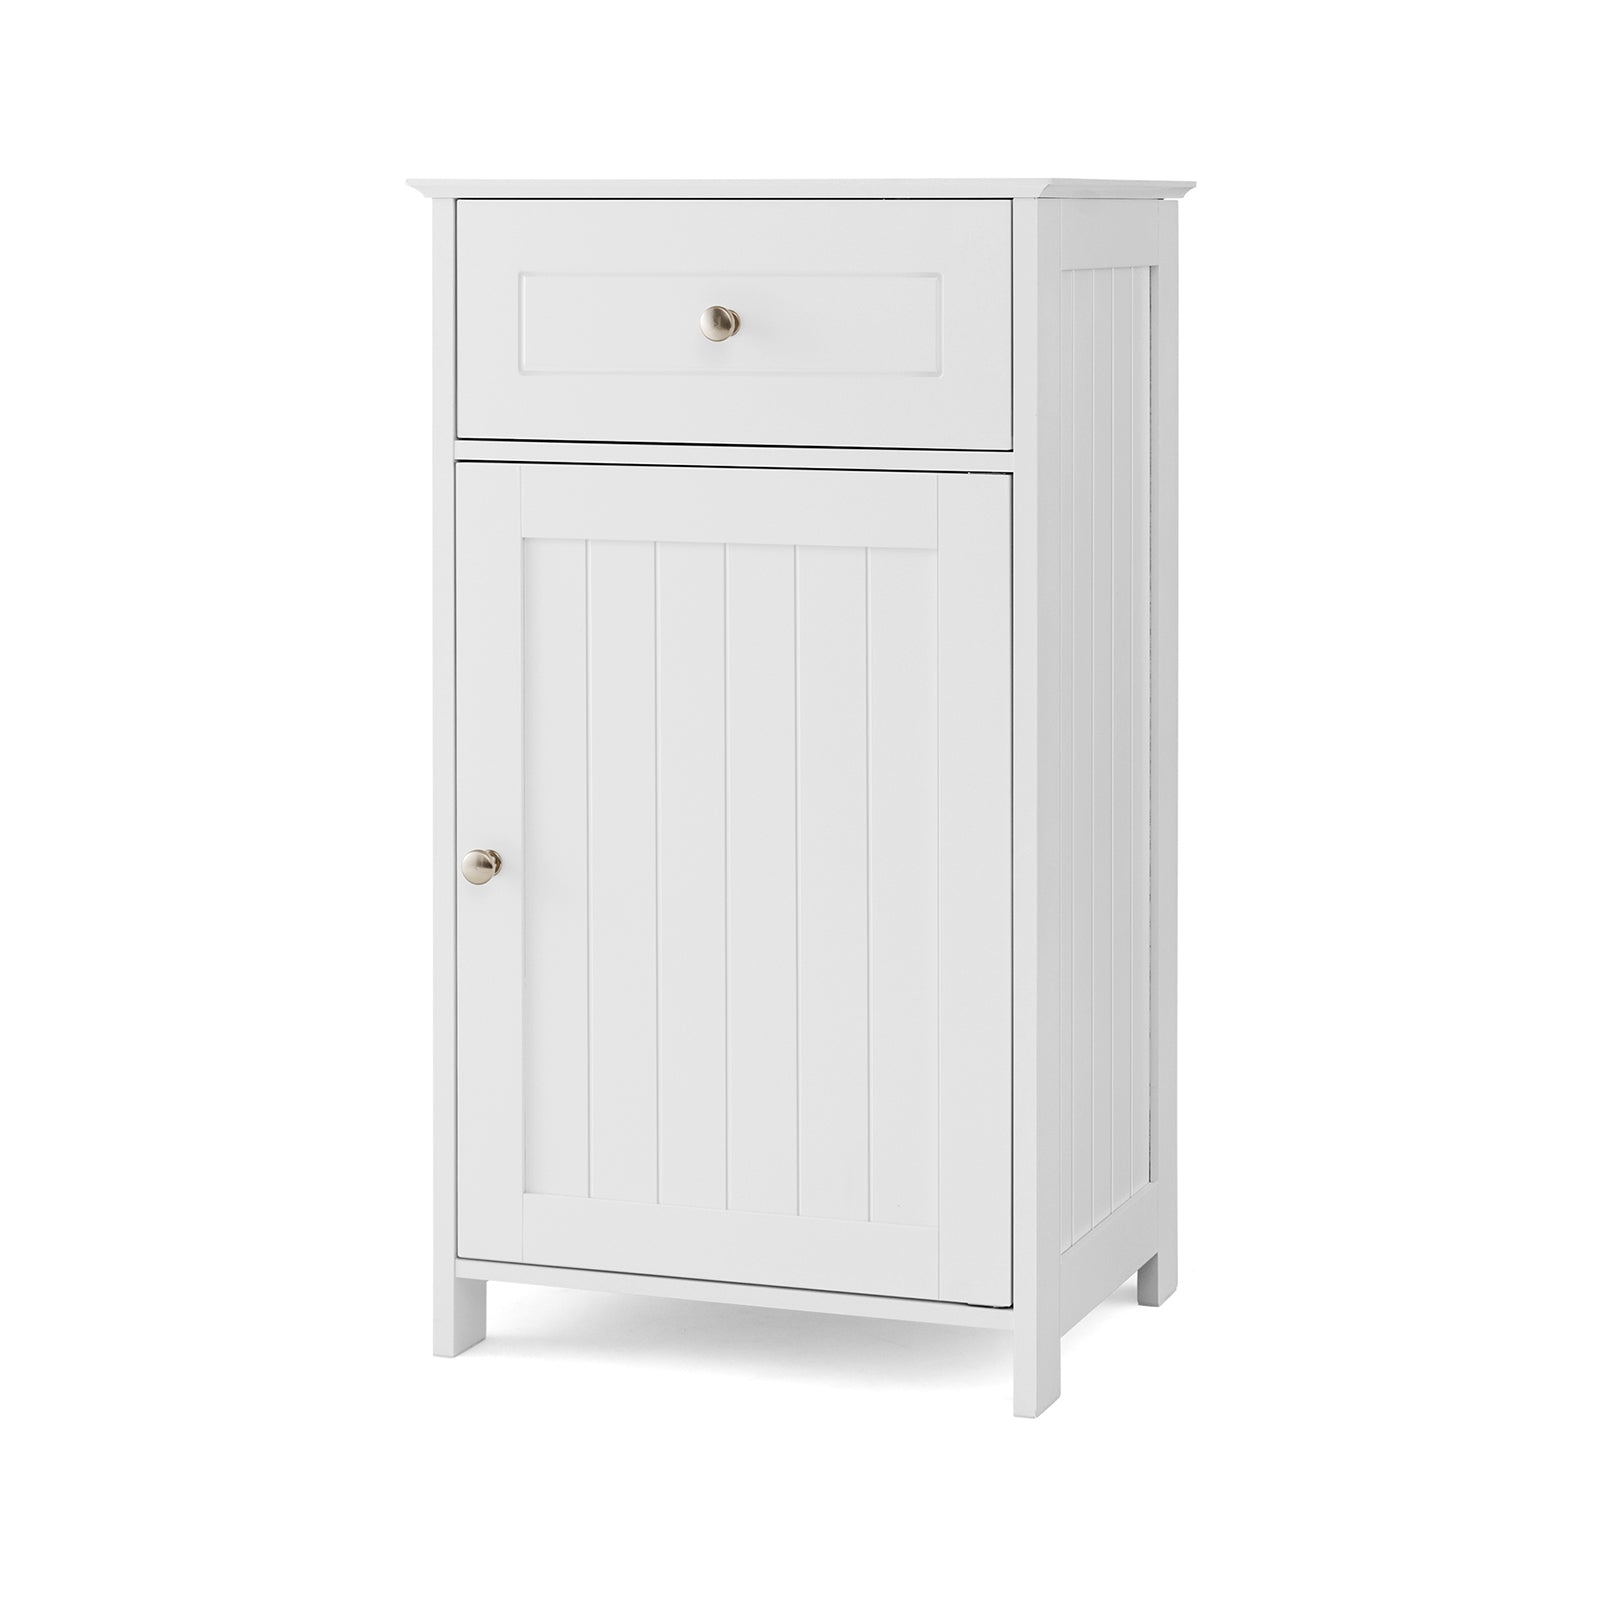 Bathroom Cabinet Floor Organizer with Single Door and Drawer-White